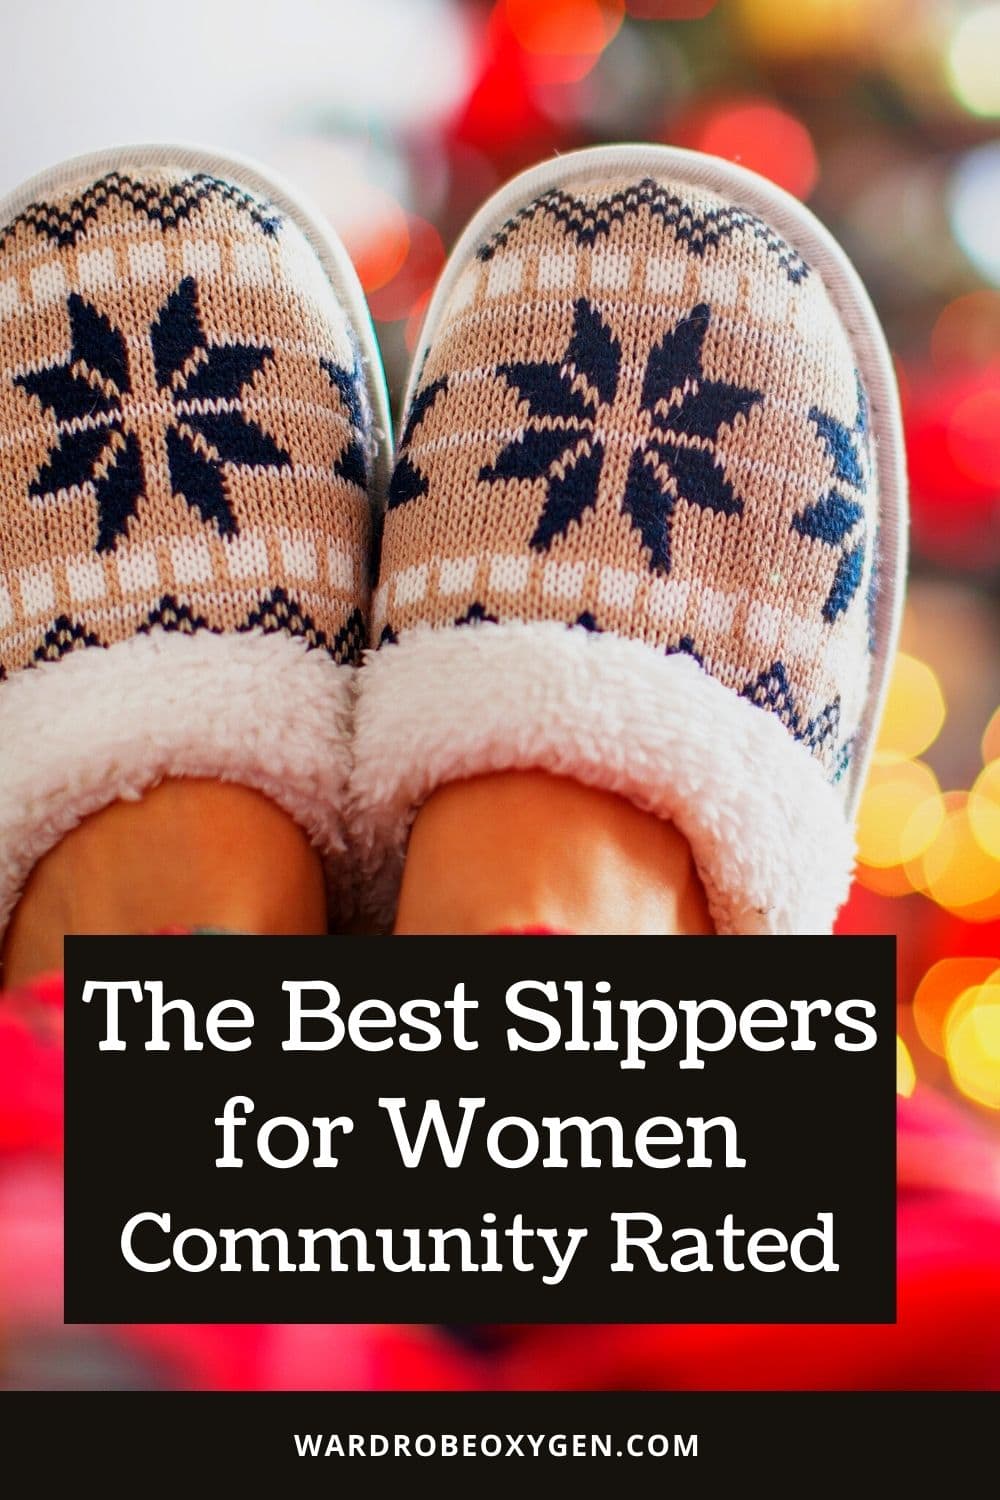 18 Best UGGs for Women: Boots, Slippers, Slides 2019